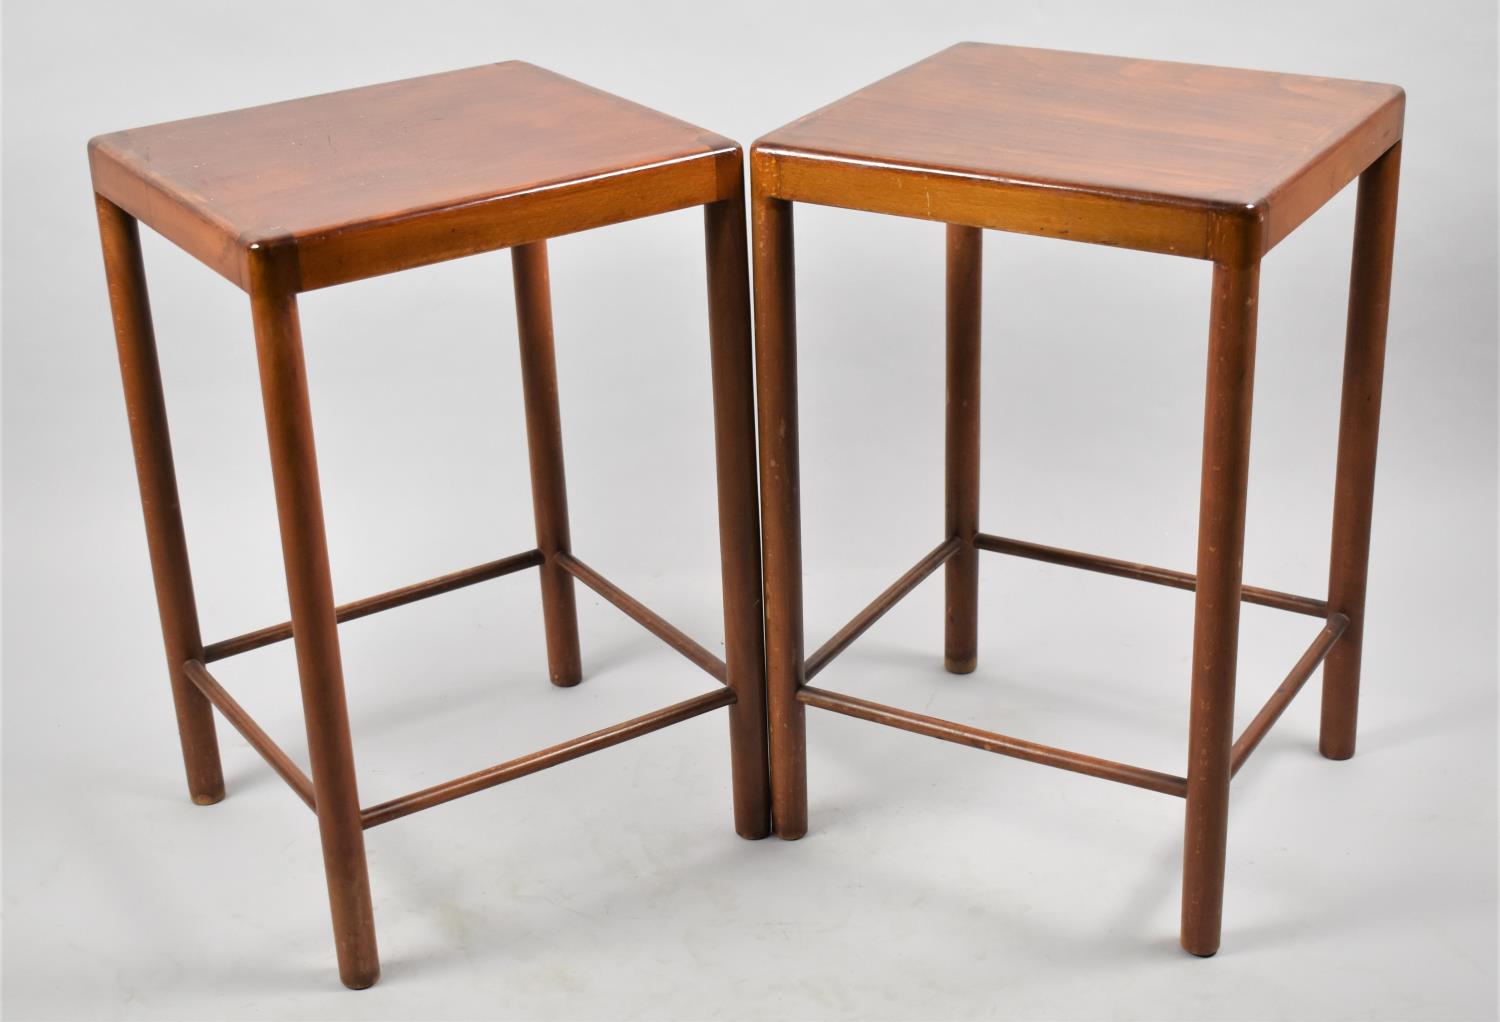 A Pair of Mid 20th Century Danish Square Topped Occasional Tables, each 50cm high